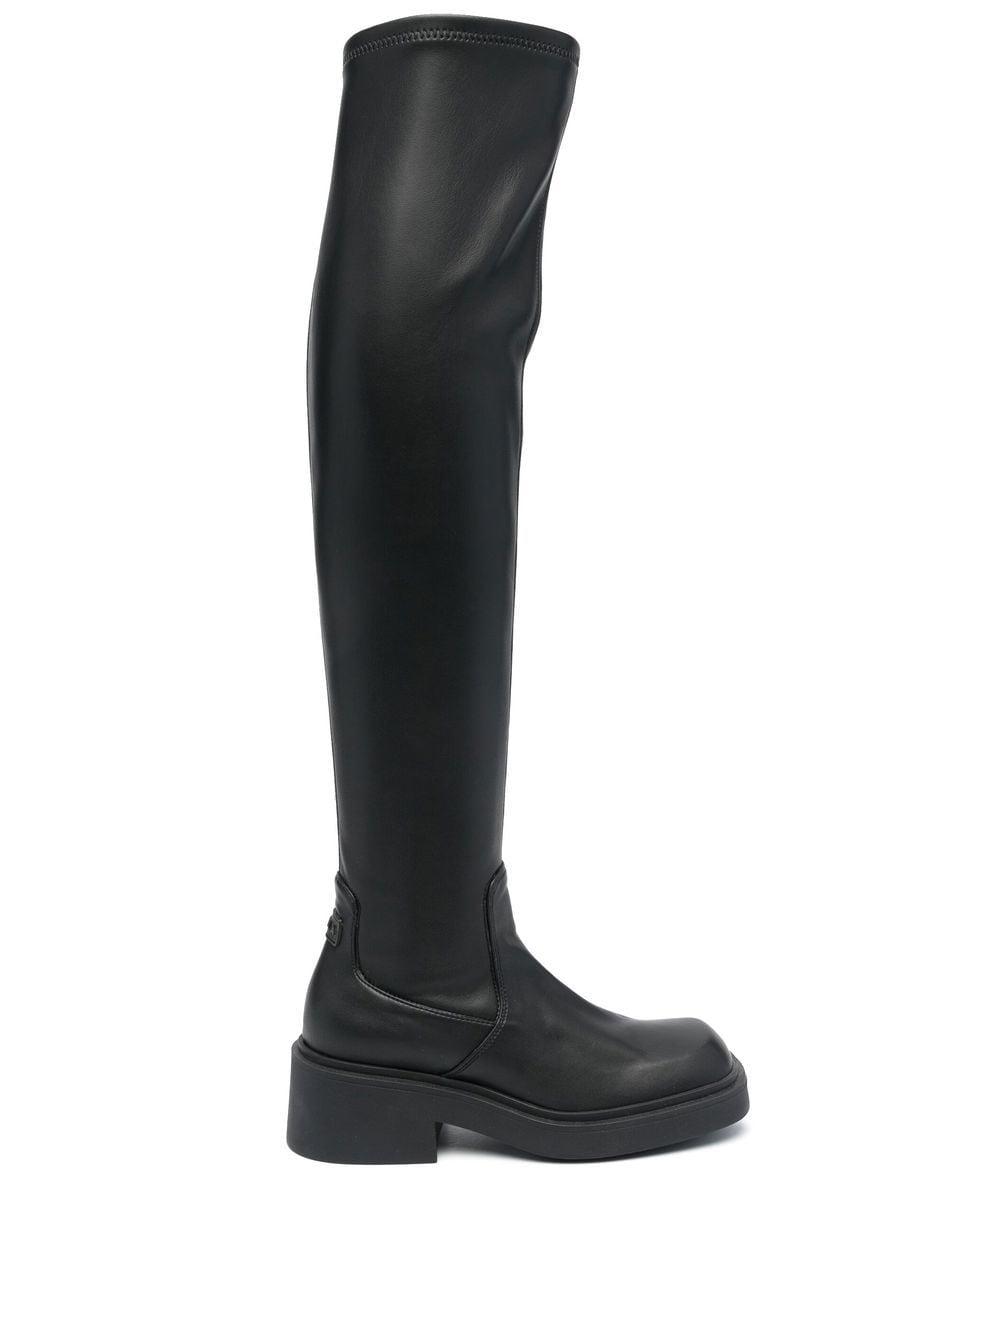 Furla Attitude Leather Thigh-high Boots in Black | Lyst Canada